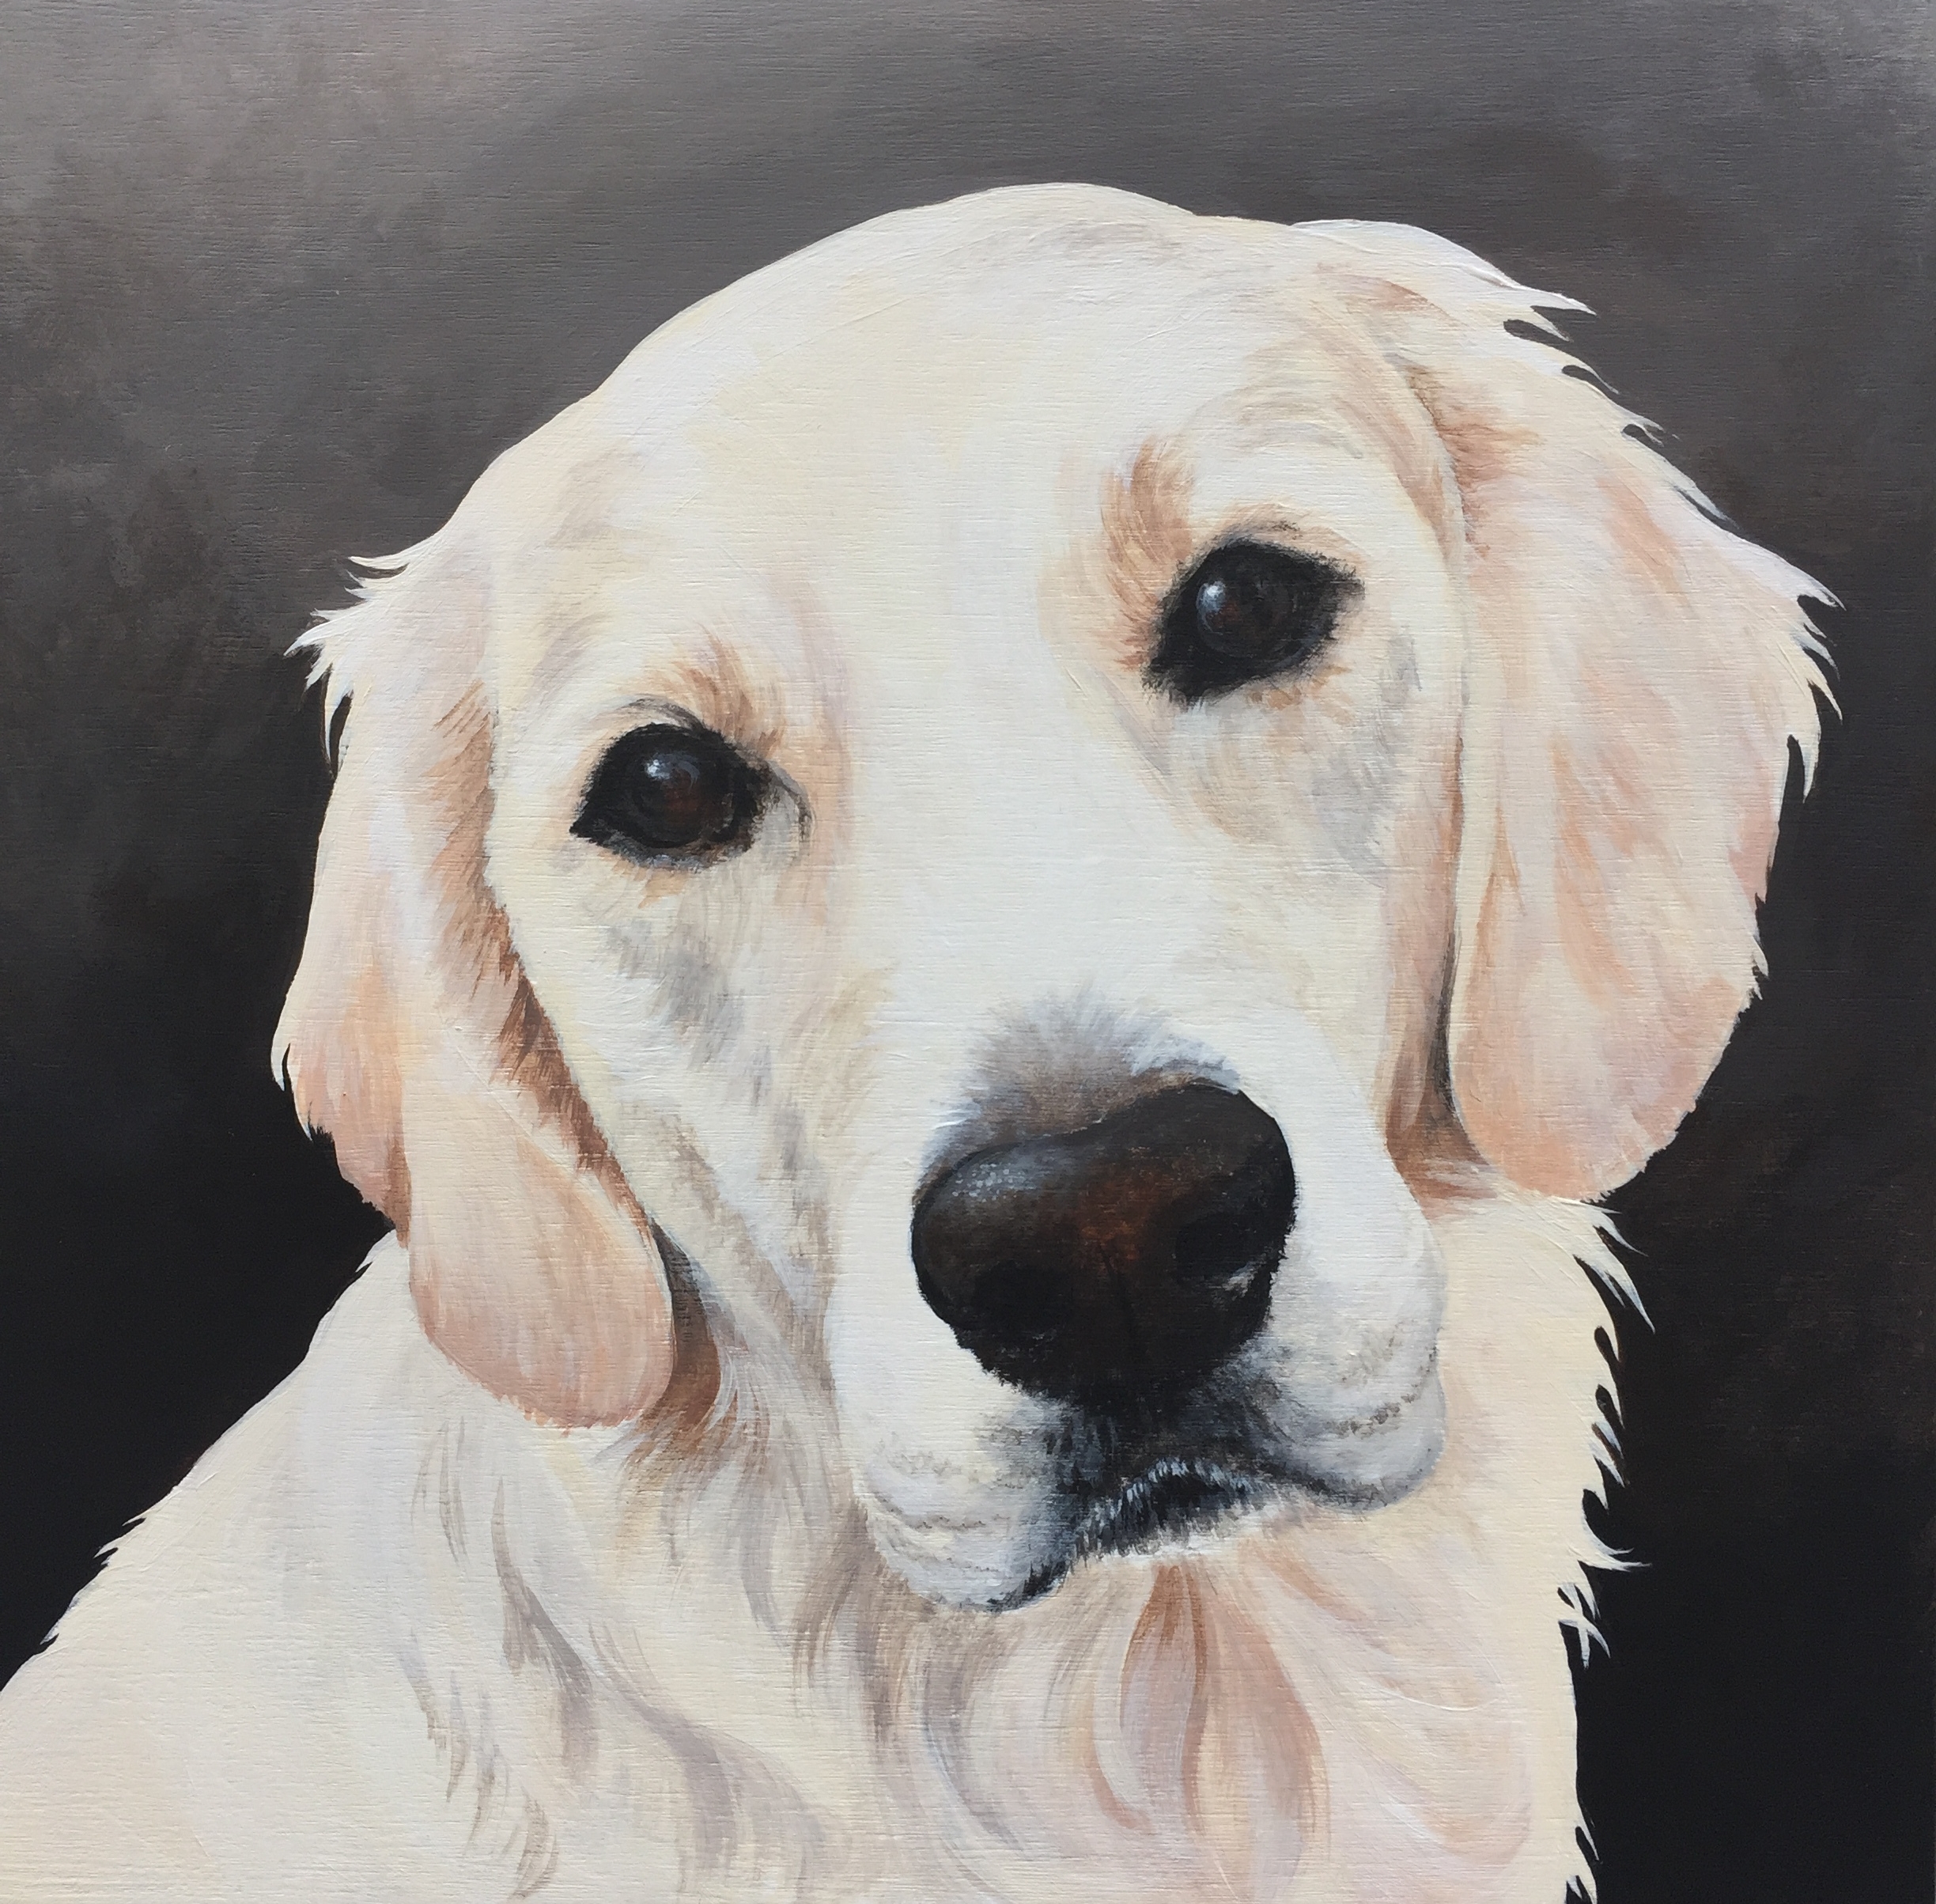  Riley the Golden - commissioned by Mike 